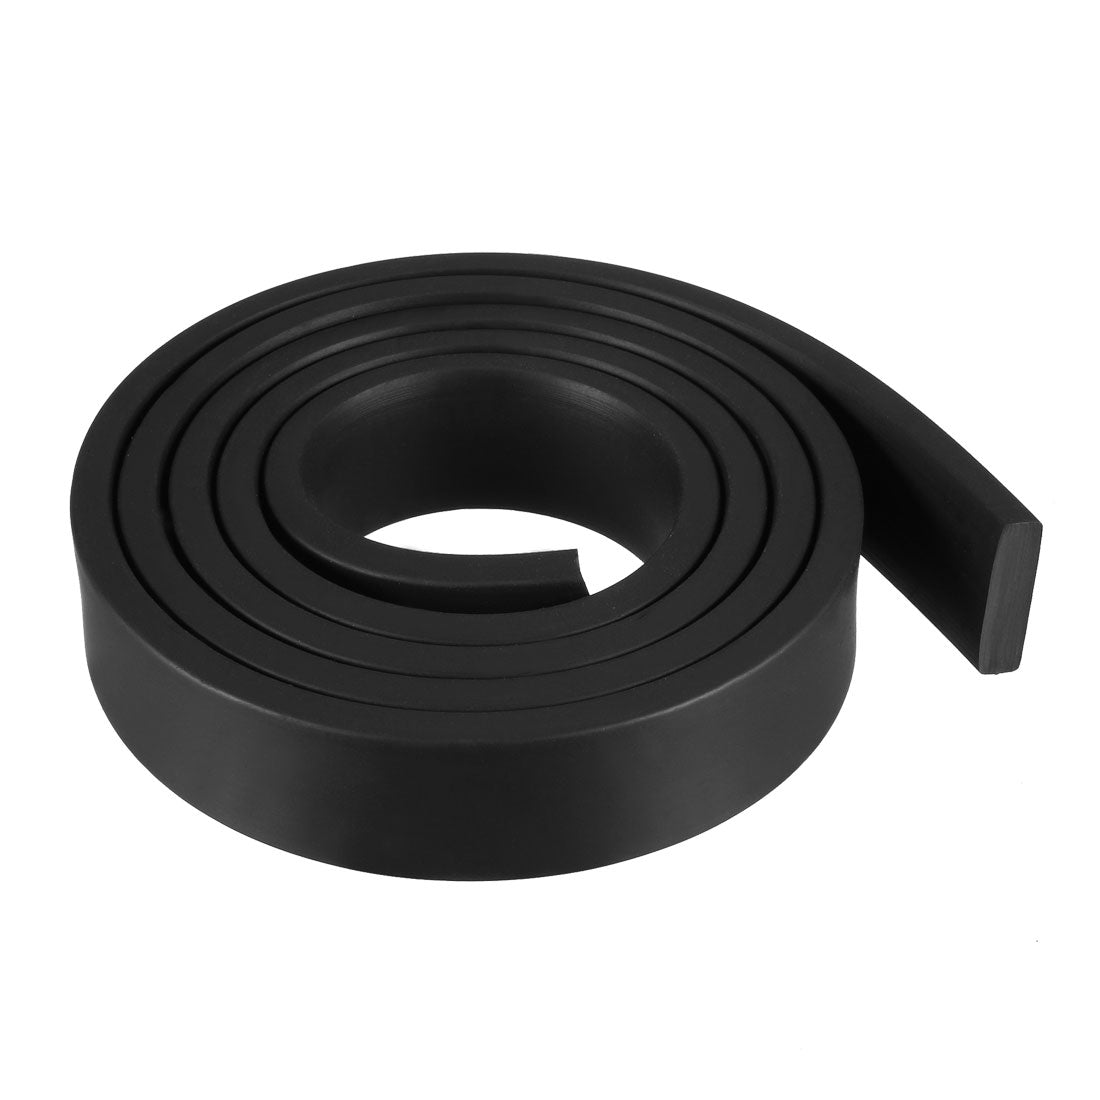 uxcell Uxcell Solid Rectangle Rubber Seal Strip 20mm Wide 5mm Thick, 1 Meter Long Black